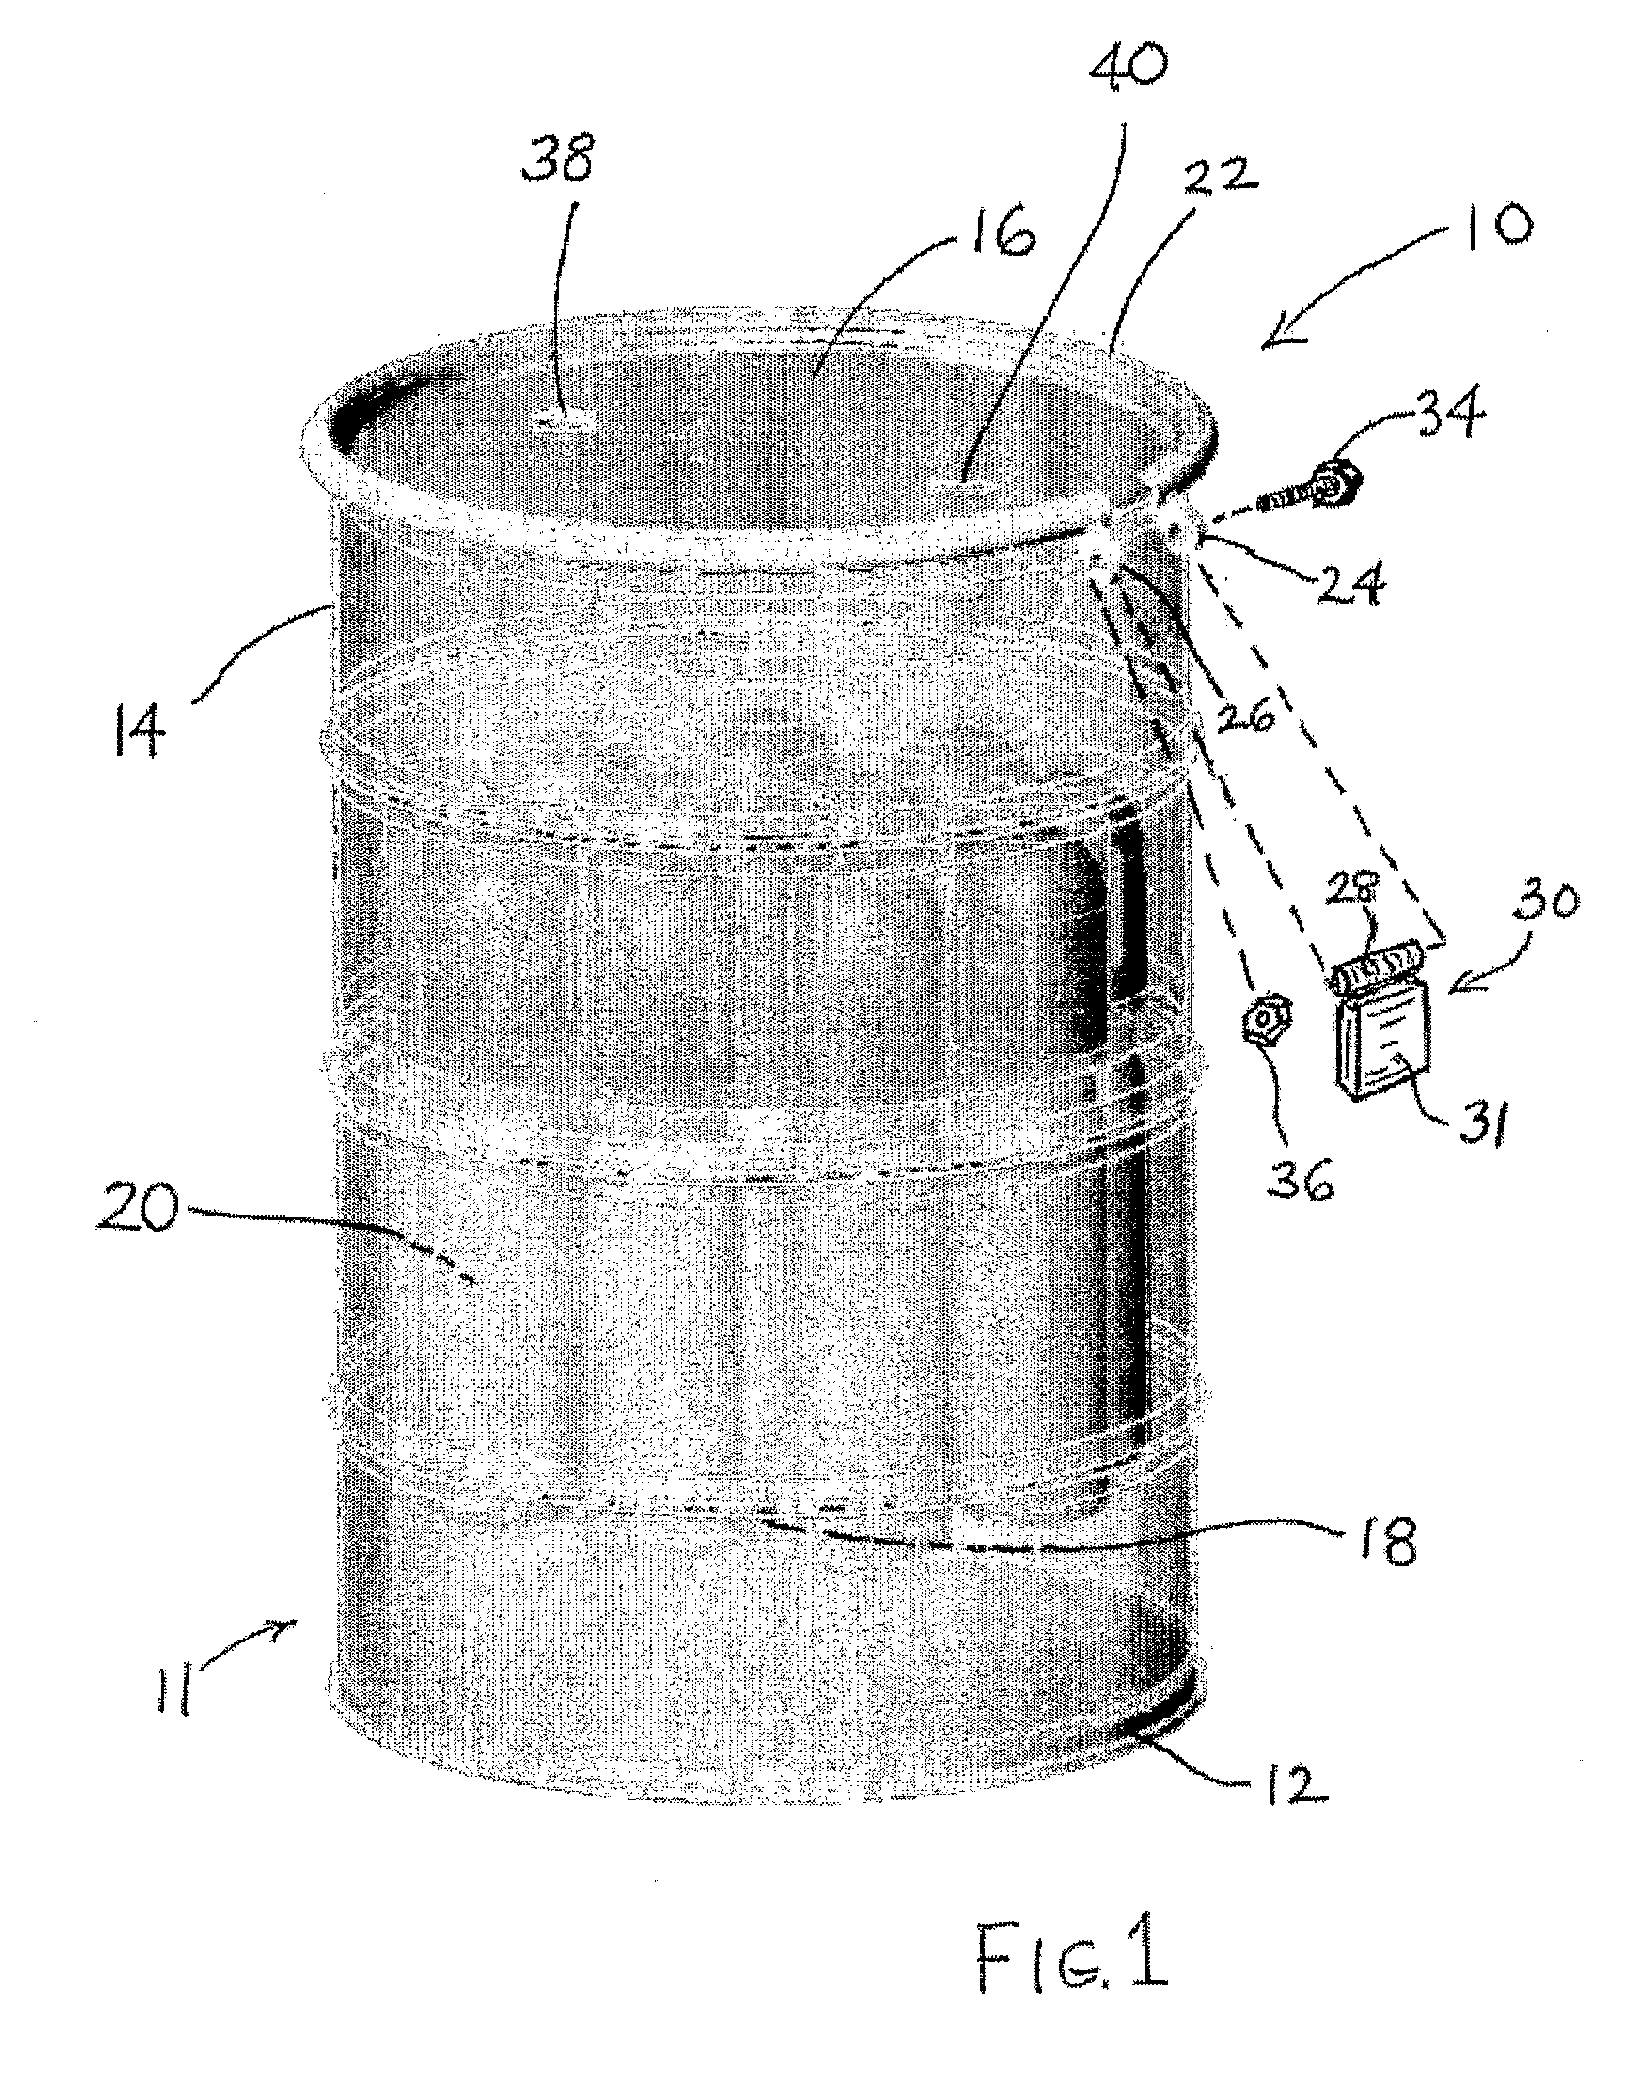 Material Containment System